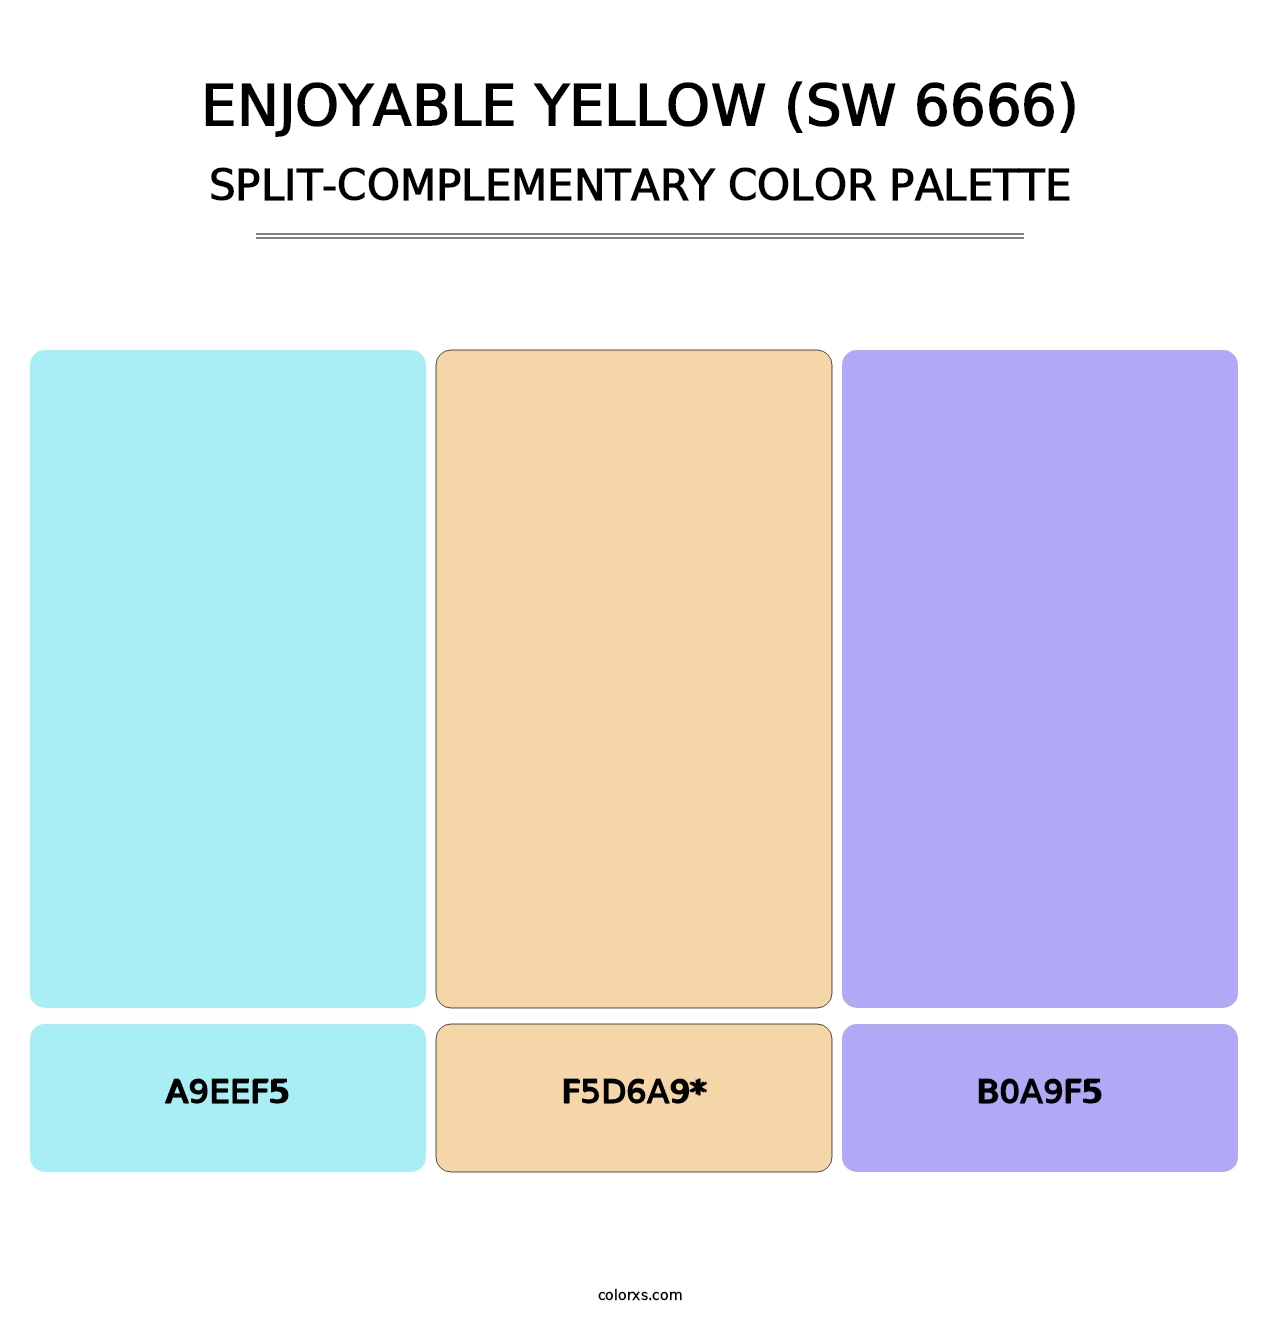 Enjoyable Yellow (SW 6666) - Split-Complementary Color Palette